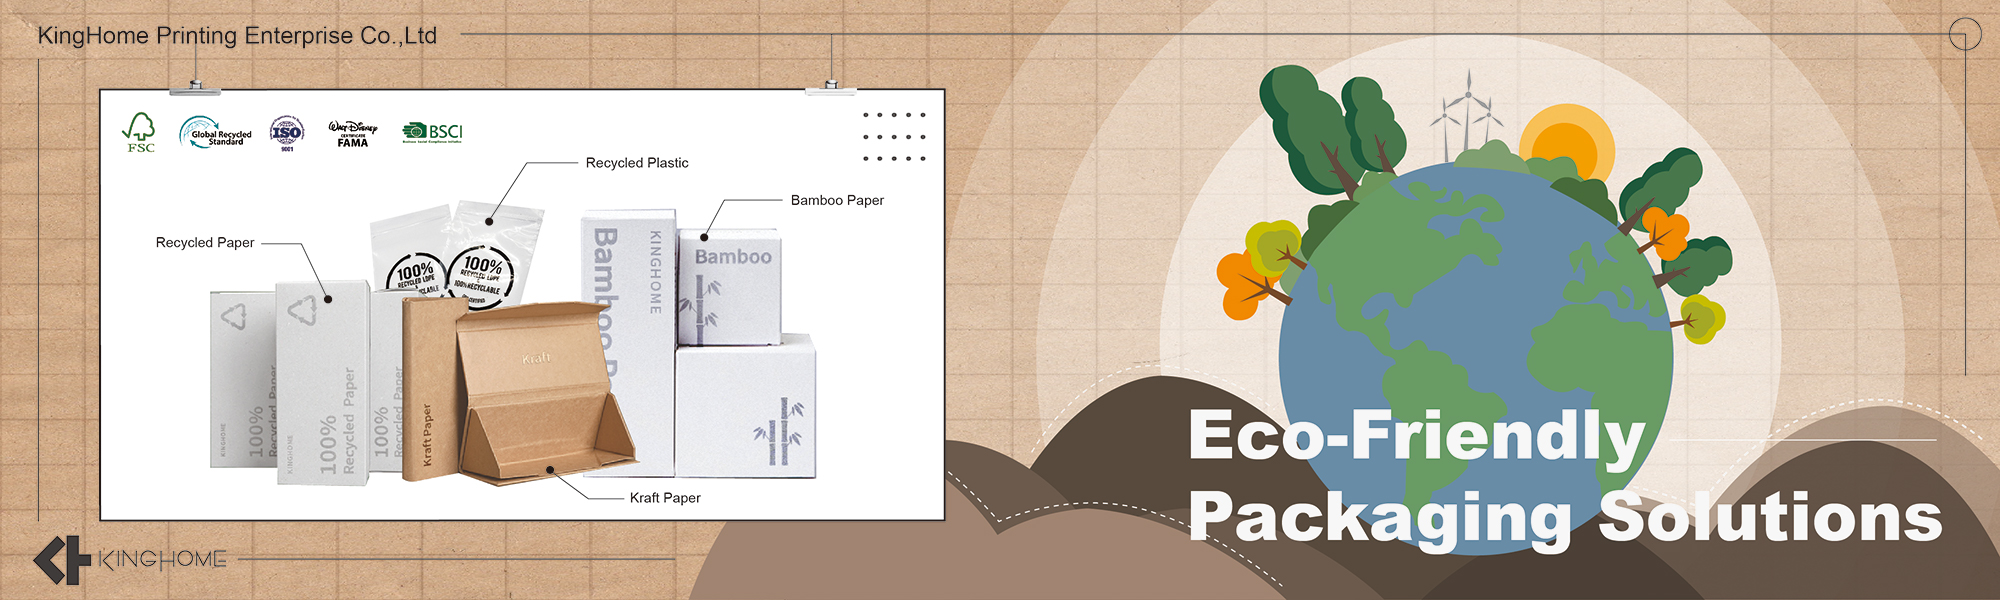 Eco-Friendly Packaging Supplier